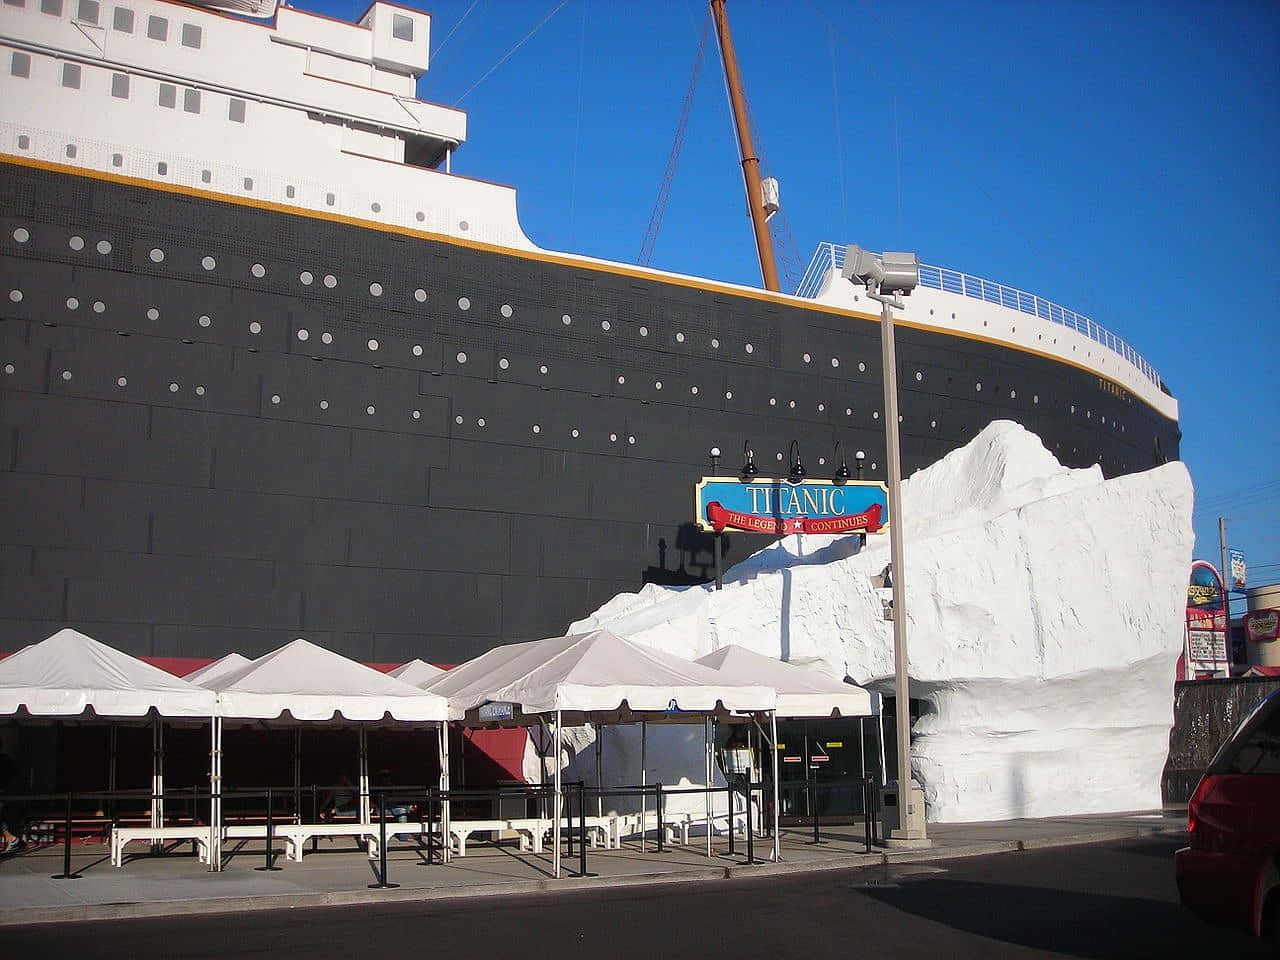 Rms Titanic Museum With Canopy Tents Wallpaper